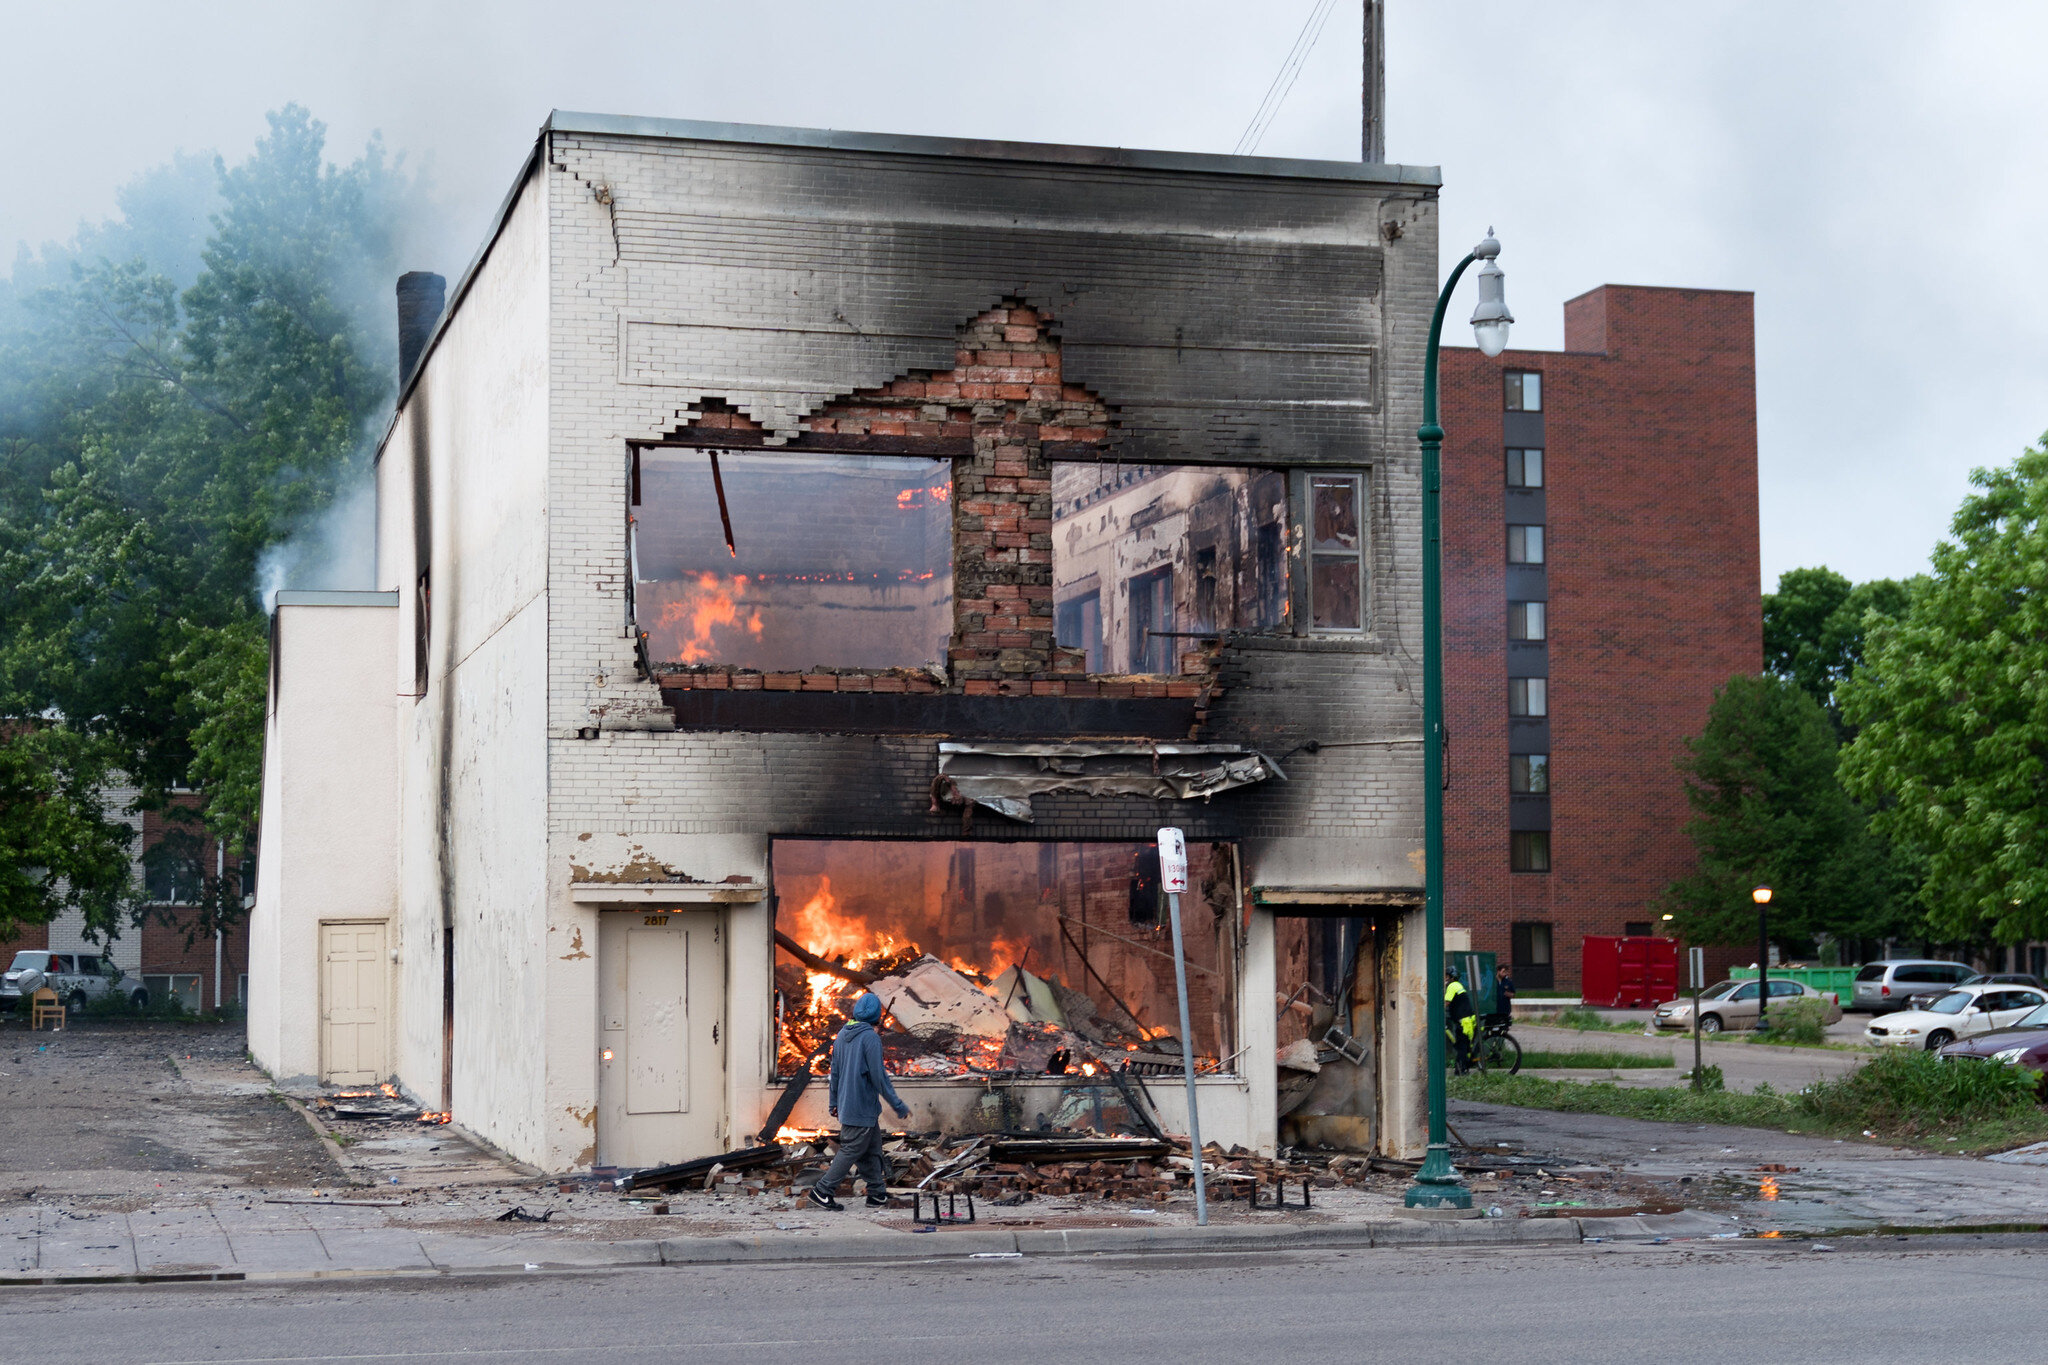  A man walks by a burning building on Thursday morning after a night of protests and rioting in Minneapolis, Minnesota 